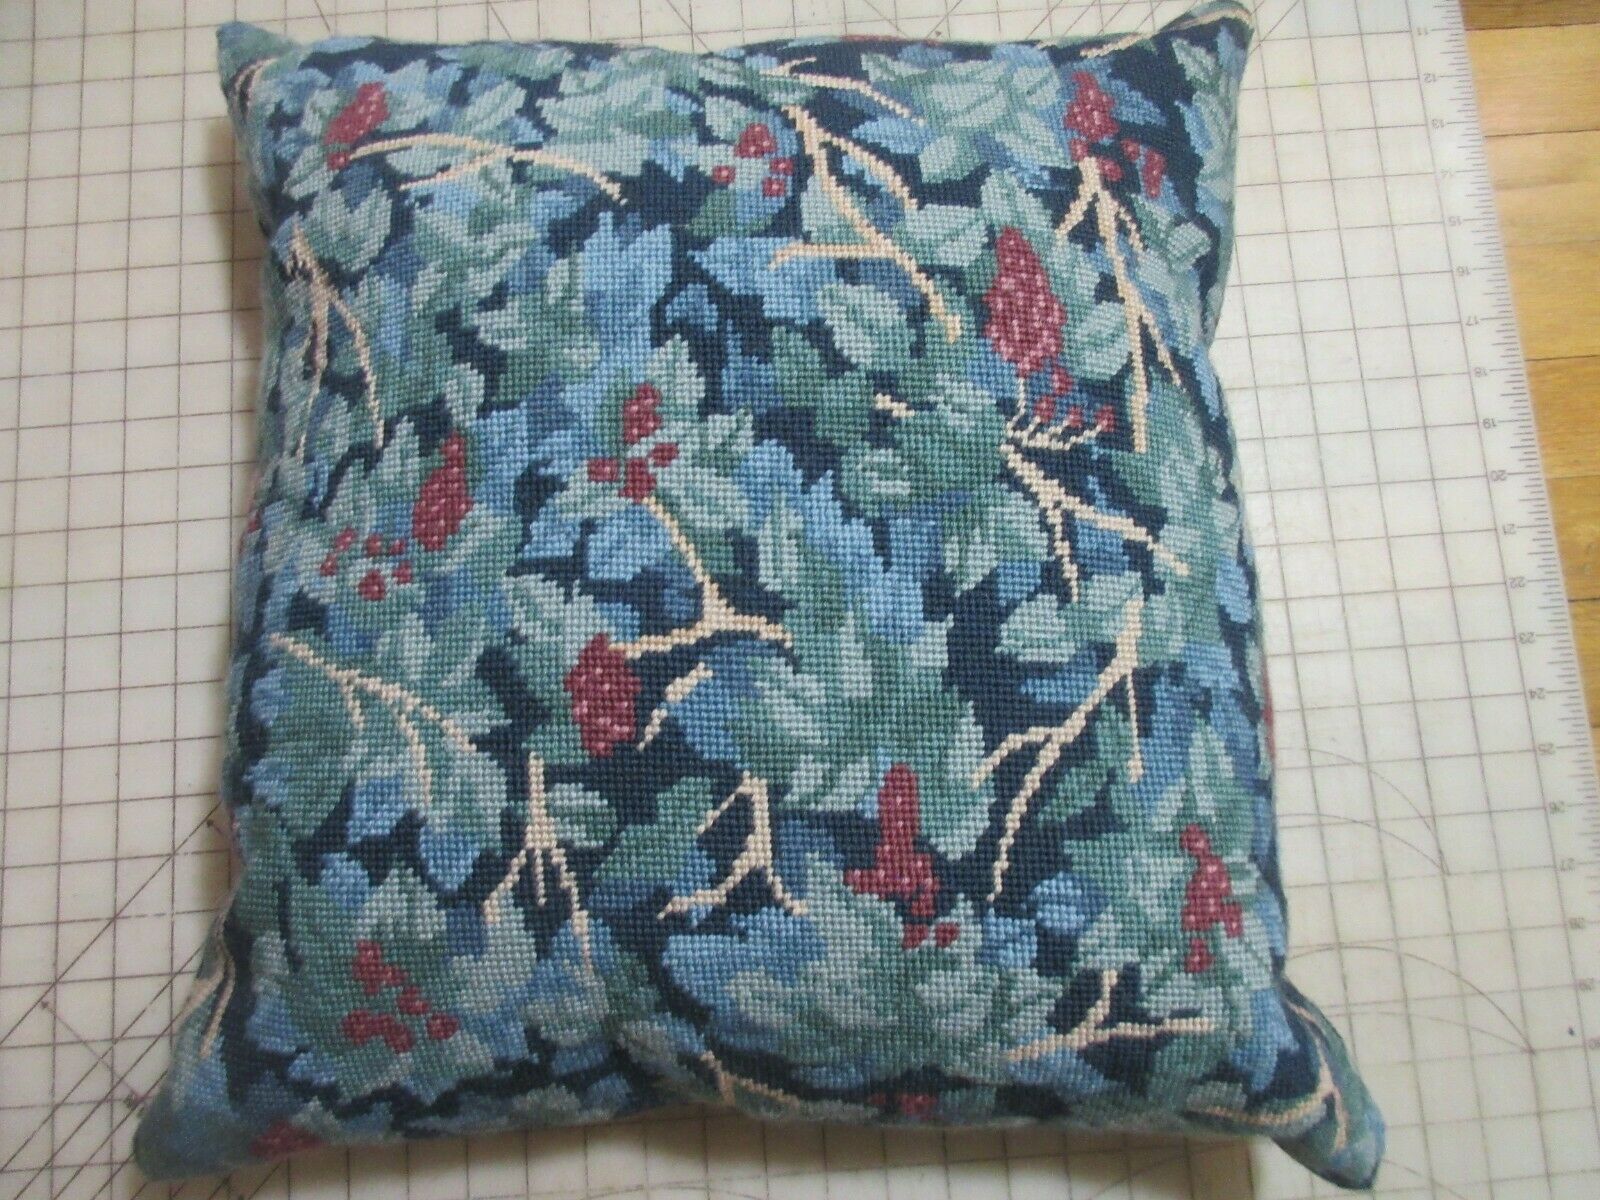 EHRMAN Needlepoint Completed PILLOW BERRIES & LEAVES Nicola Mountney 7